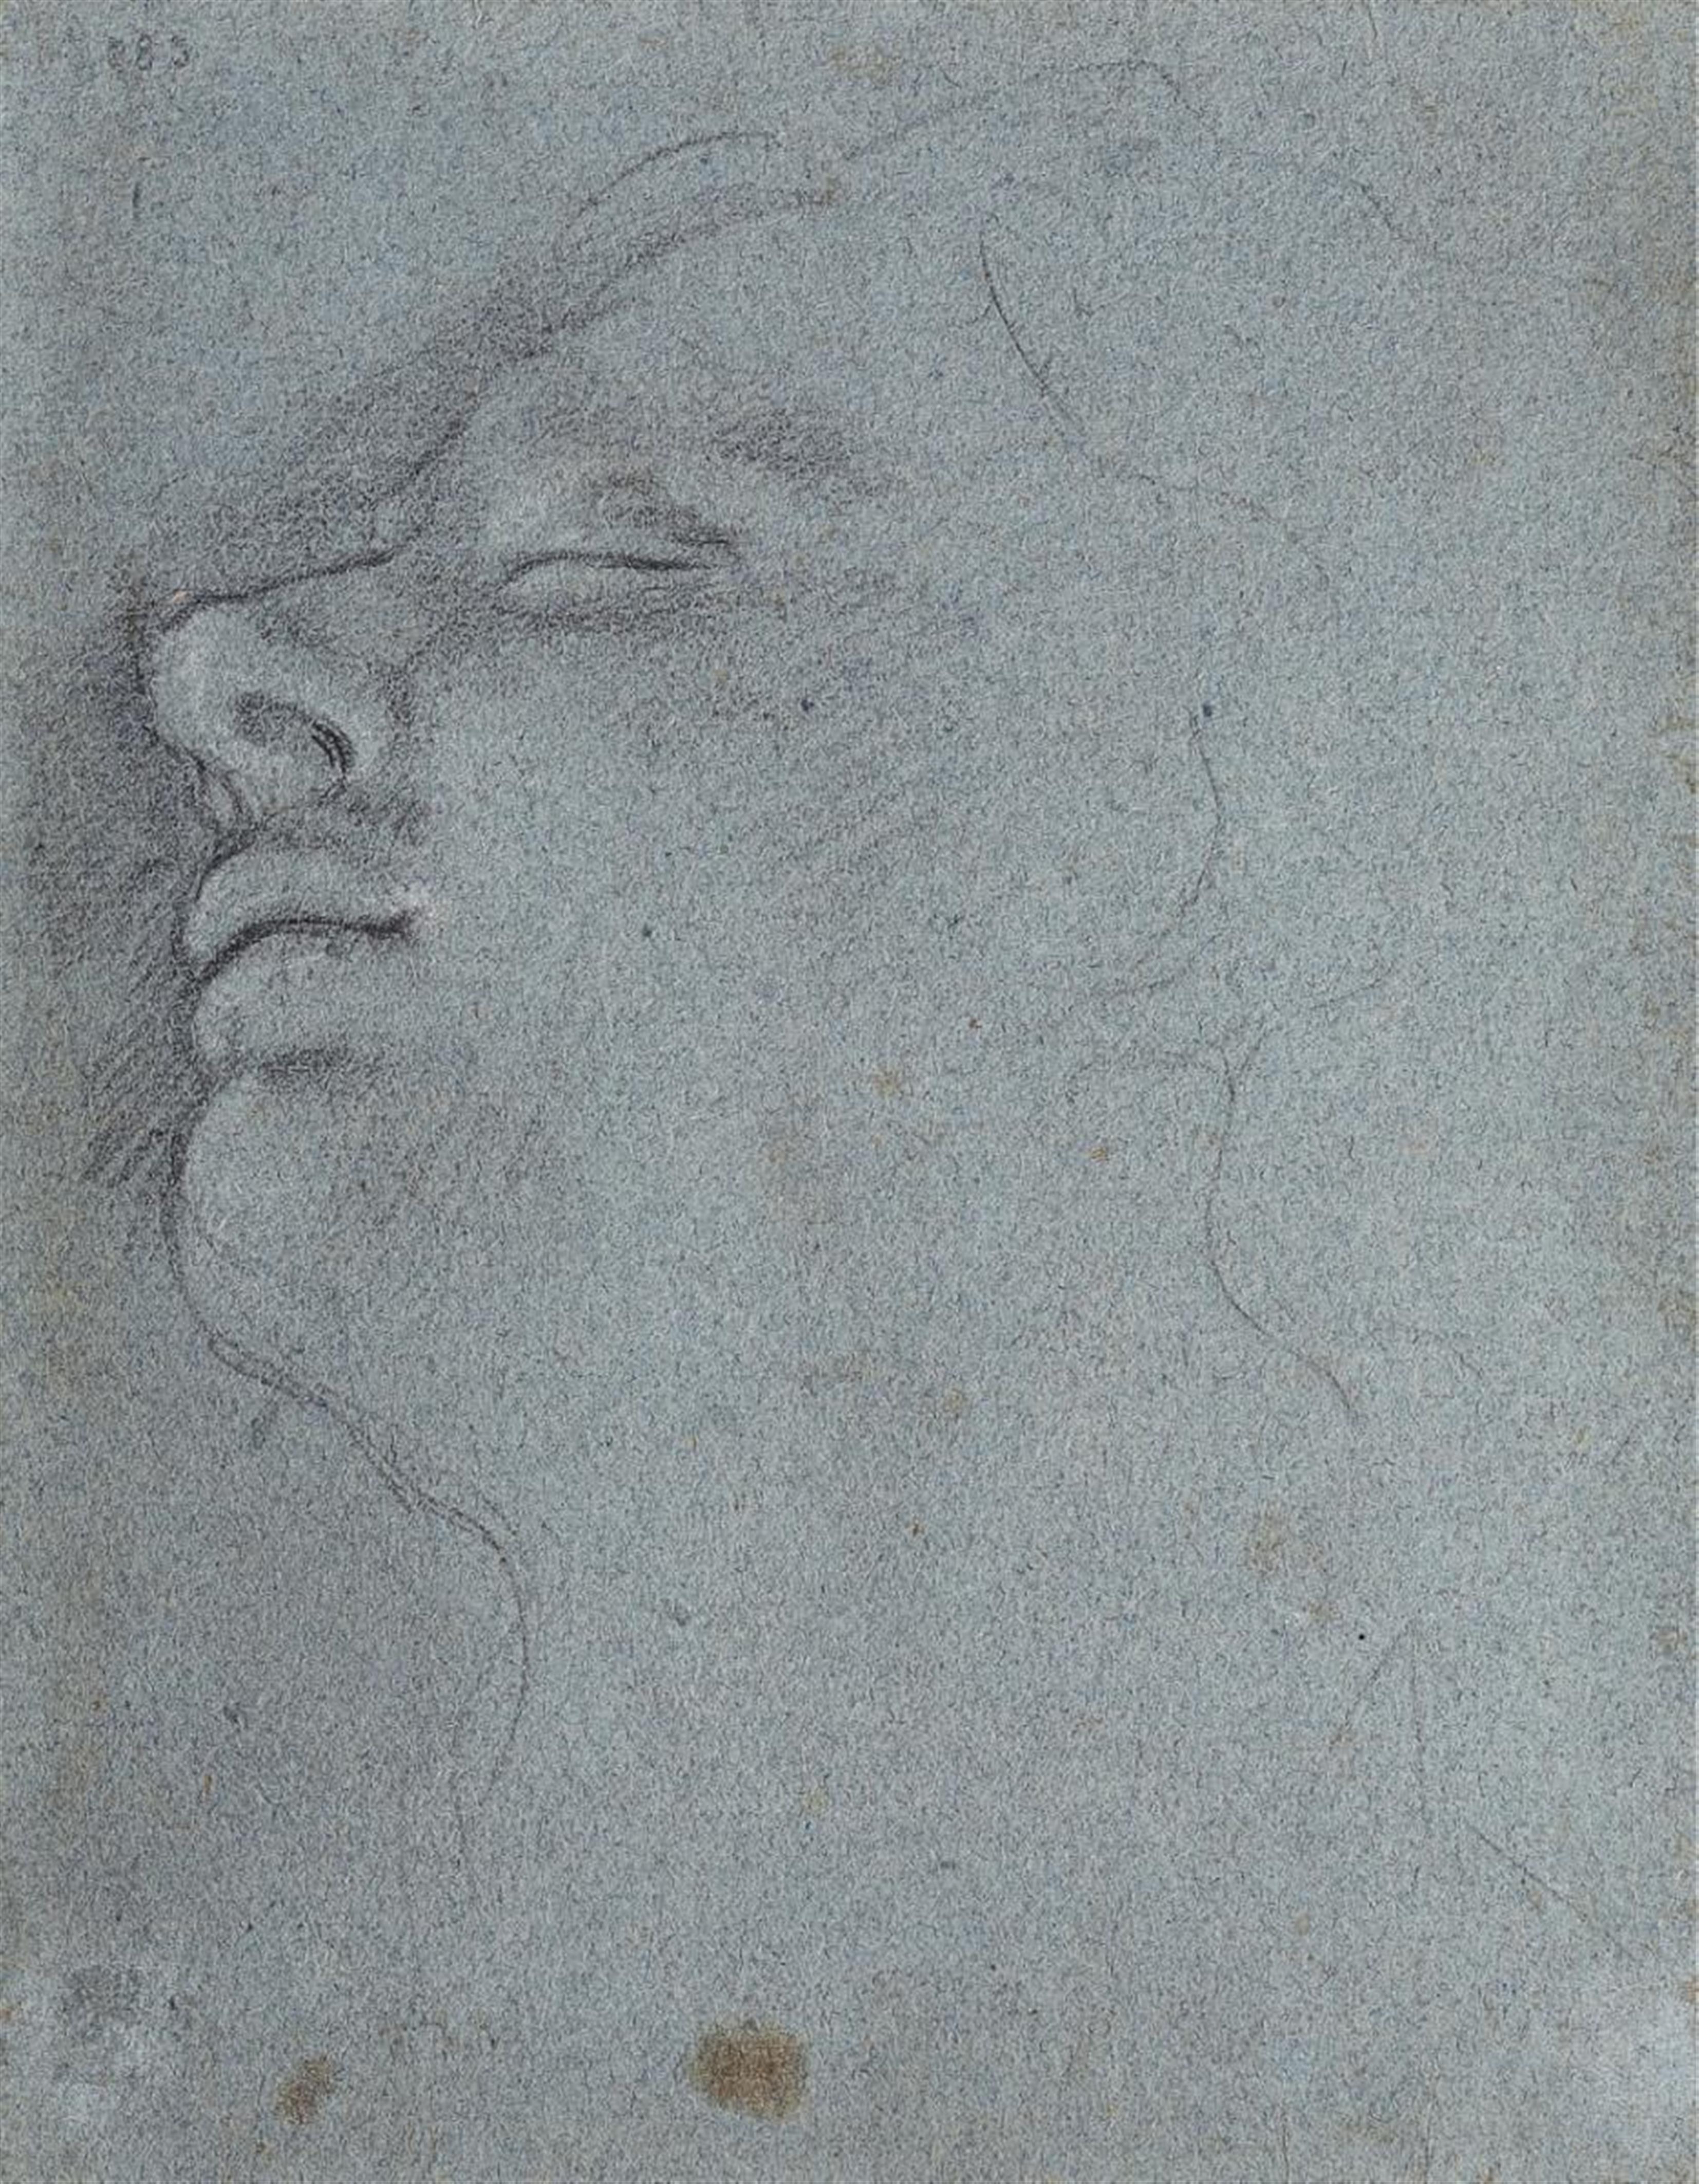 Annibale Carracci, attributed to - HEAD OF A YOUNG MAN WITH HIS EYES CLOSED - image-1